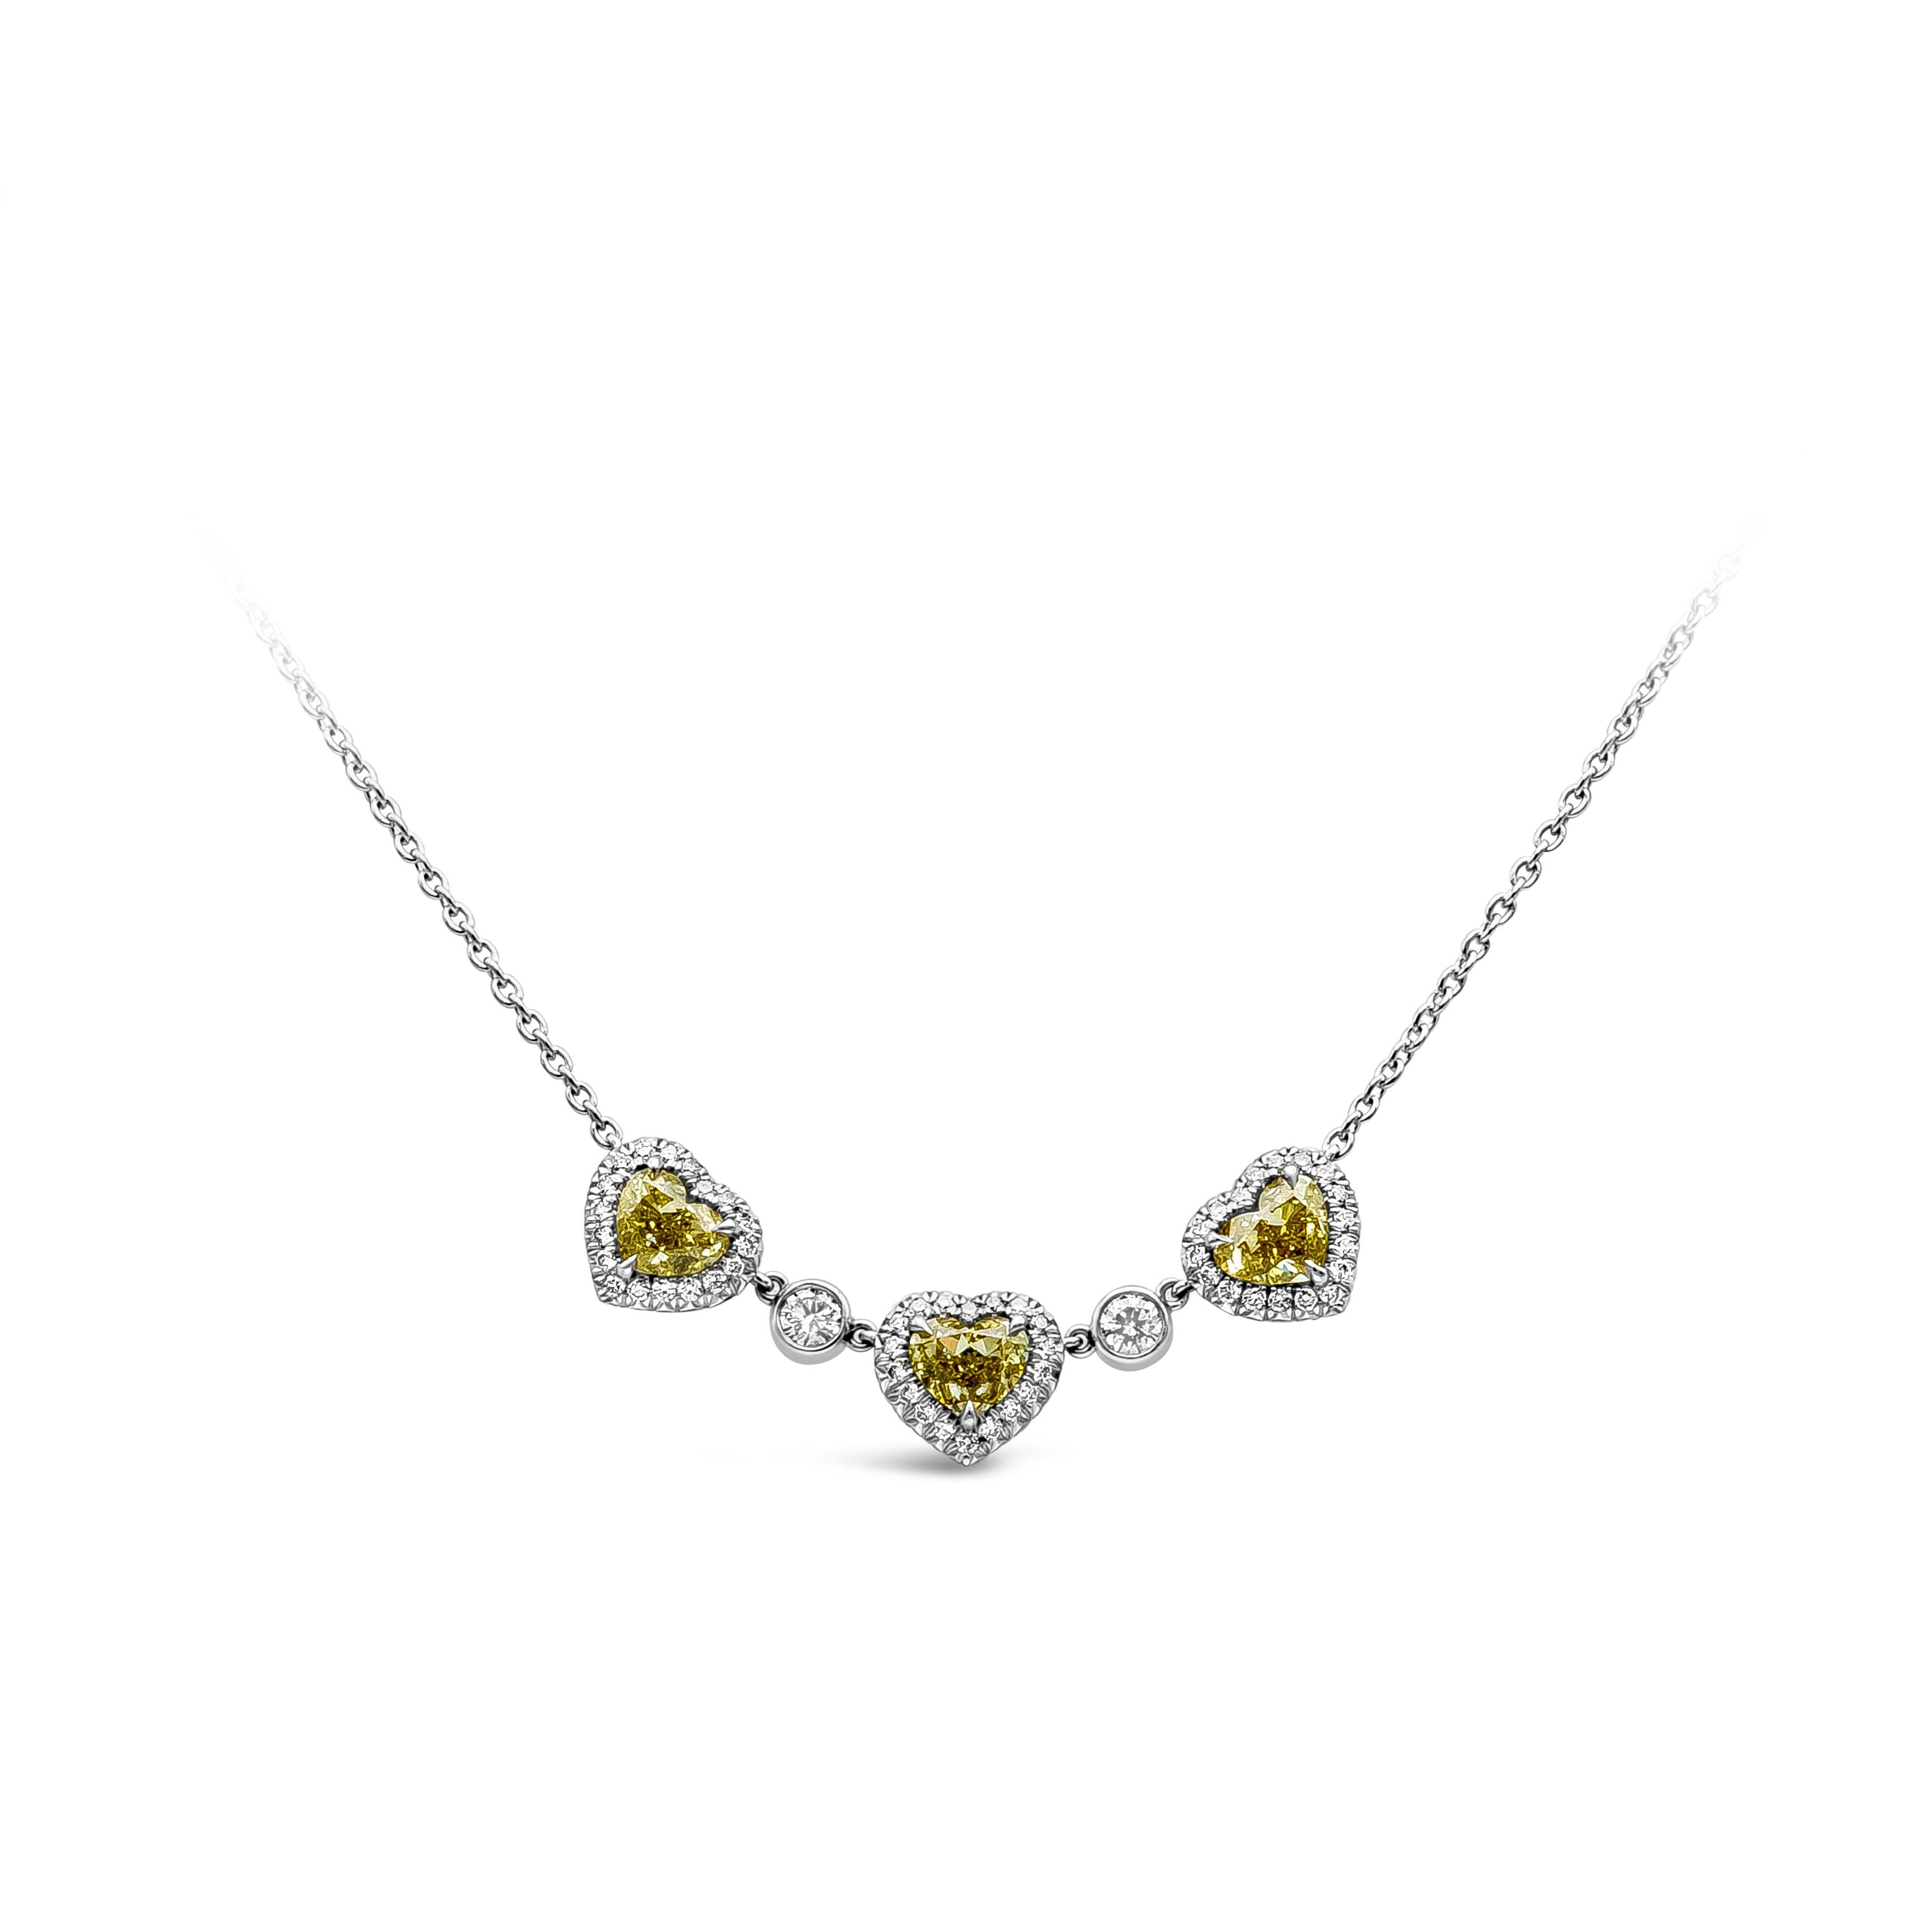 A simple but elegant diamond pendant necklace showcasing a row of three heart shape fancy intense yellow diamonds accented by bright round diamonds. Two round diamonds bezel are in between the heart shape diamonds set in platinum. Fancy intense